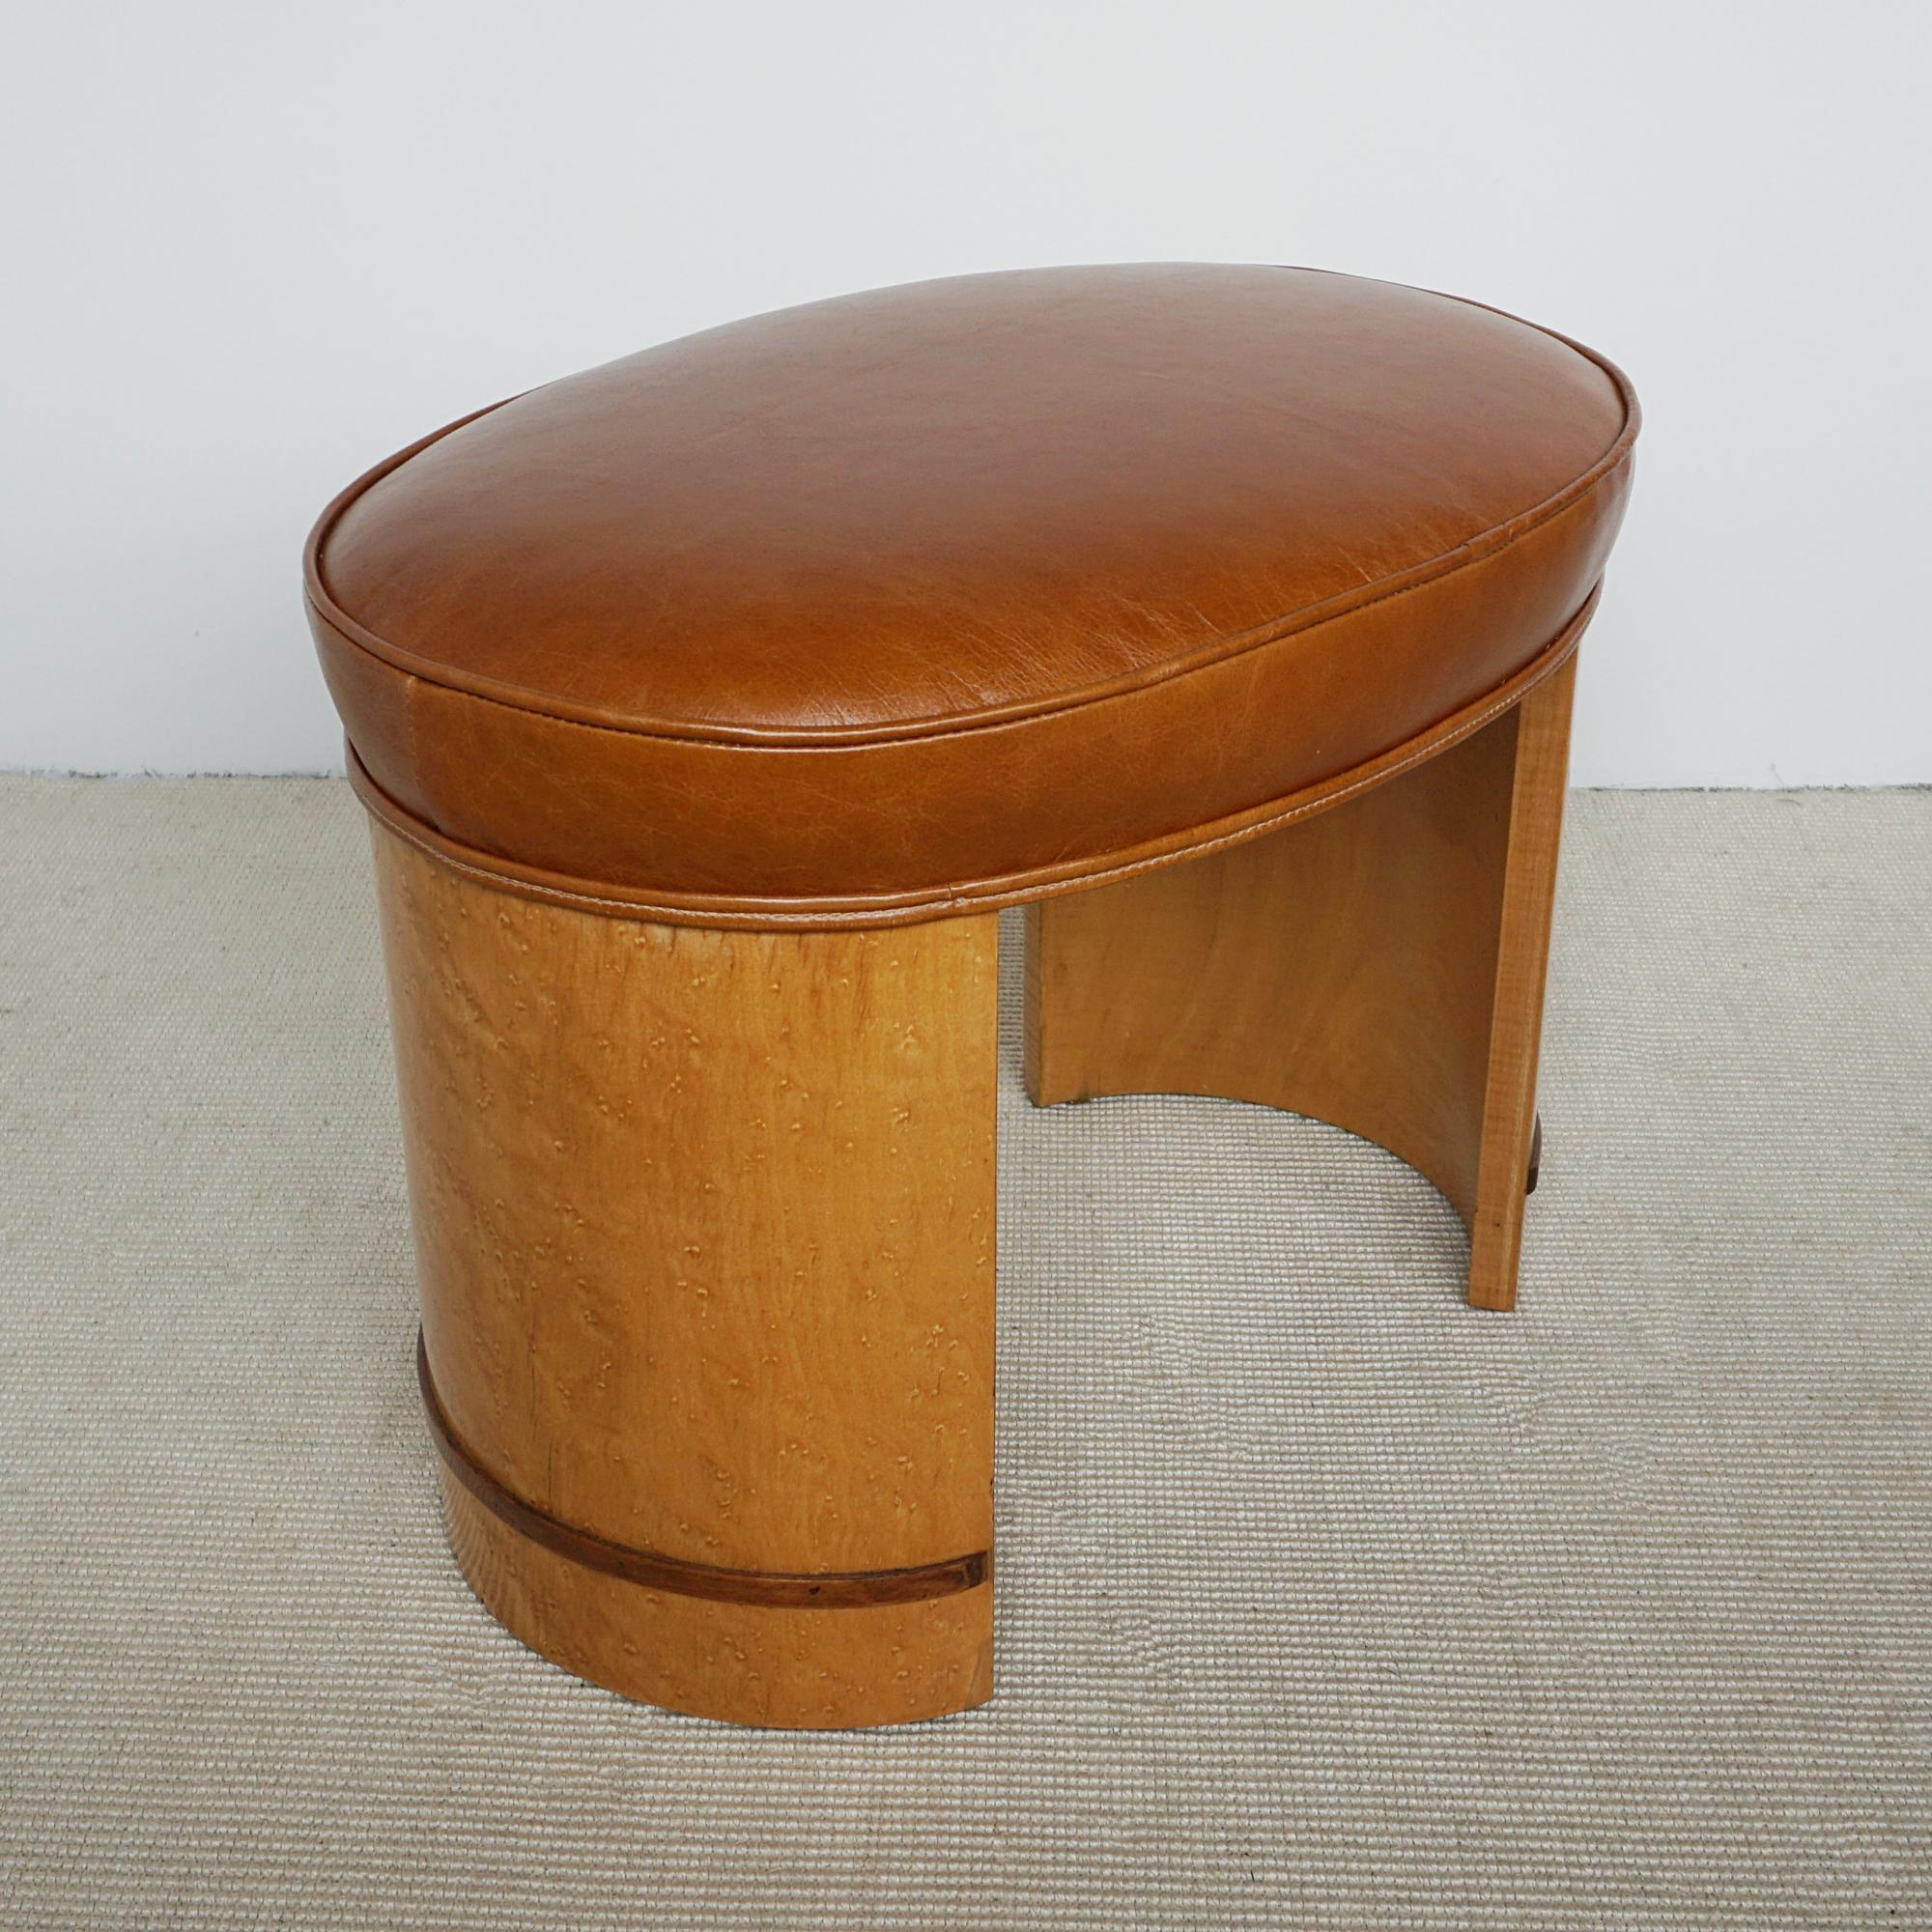 Art Deco Birdseye Maple Veneered Stool With Brown Leather Re-upholstery For Sale 1